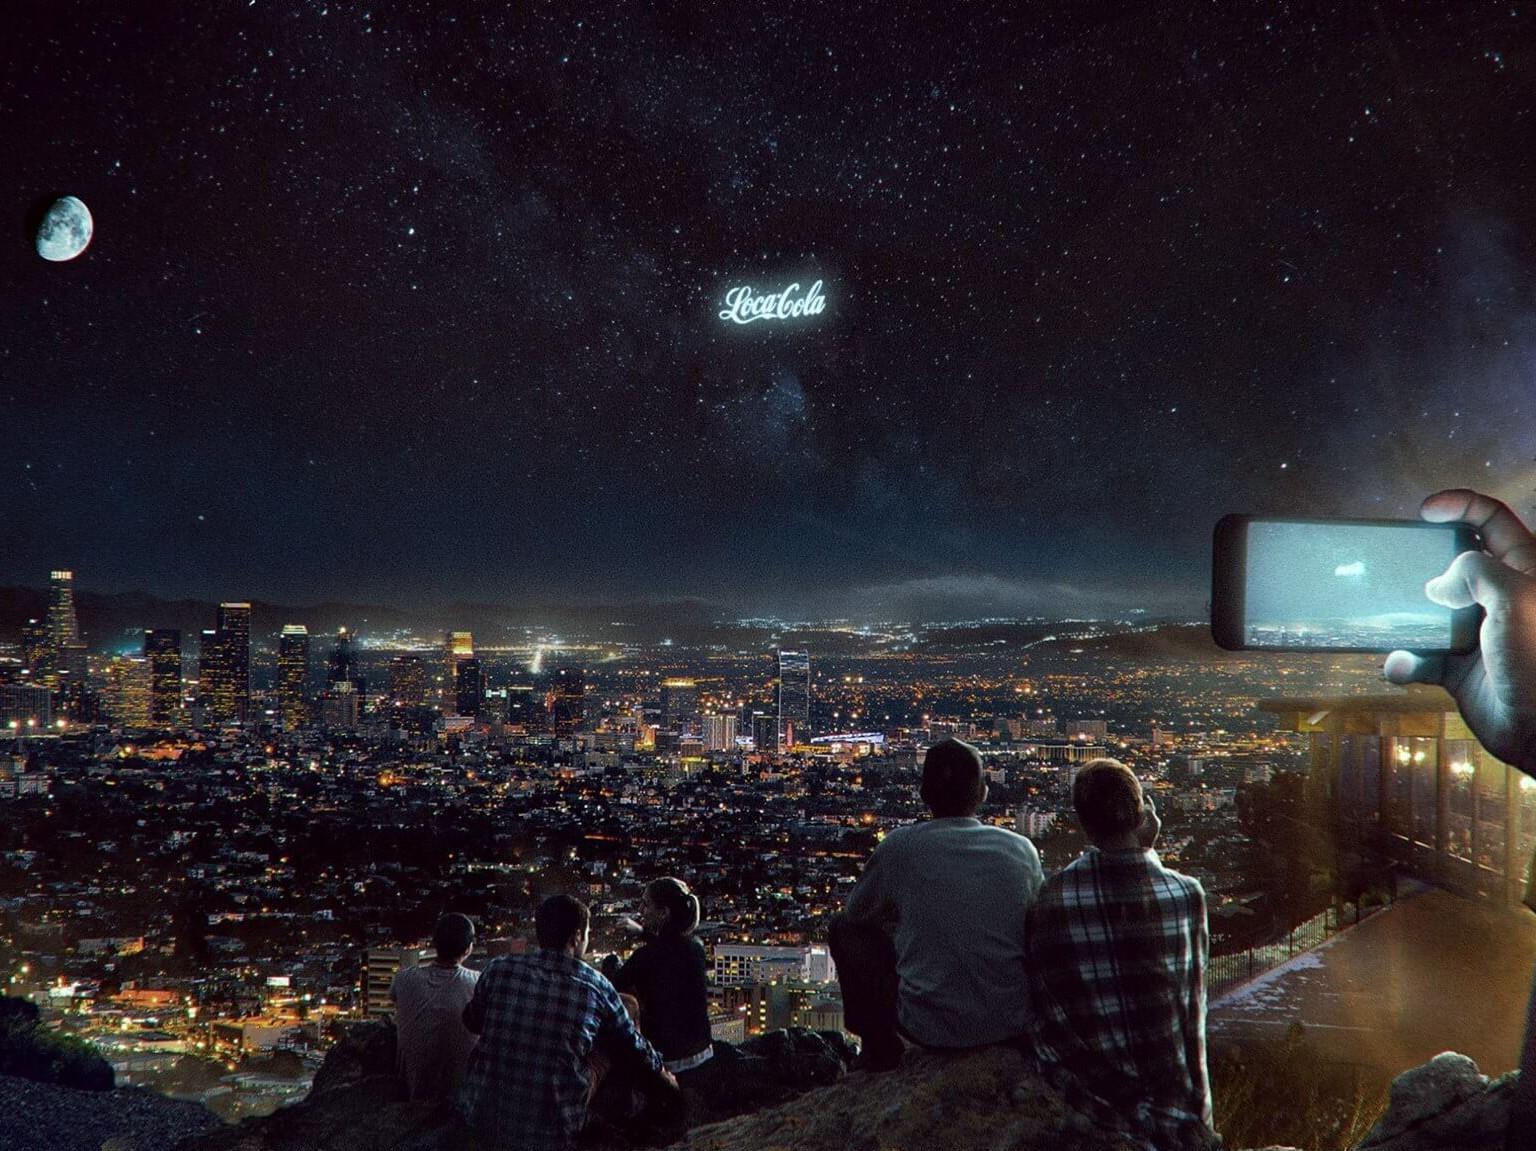 Startrocket plans to charge companies hundreds of thousands of dollars to advertise on their space billboards, such as this mock-up for 'LolaCola'